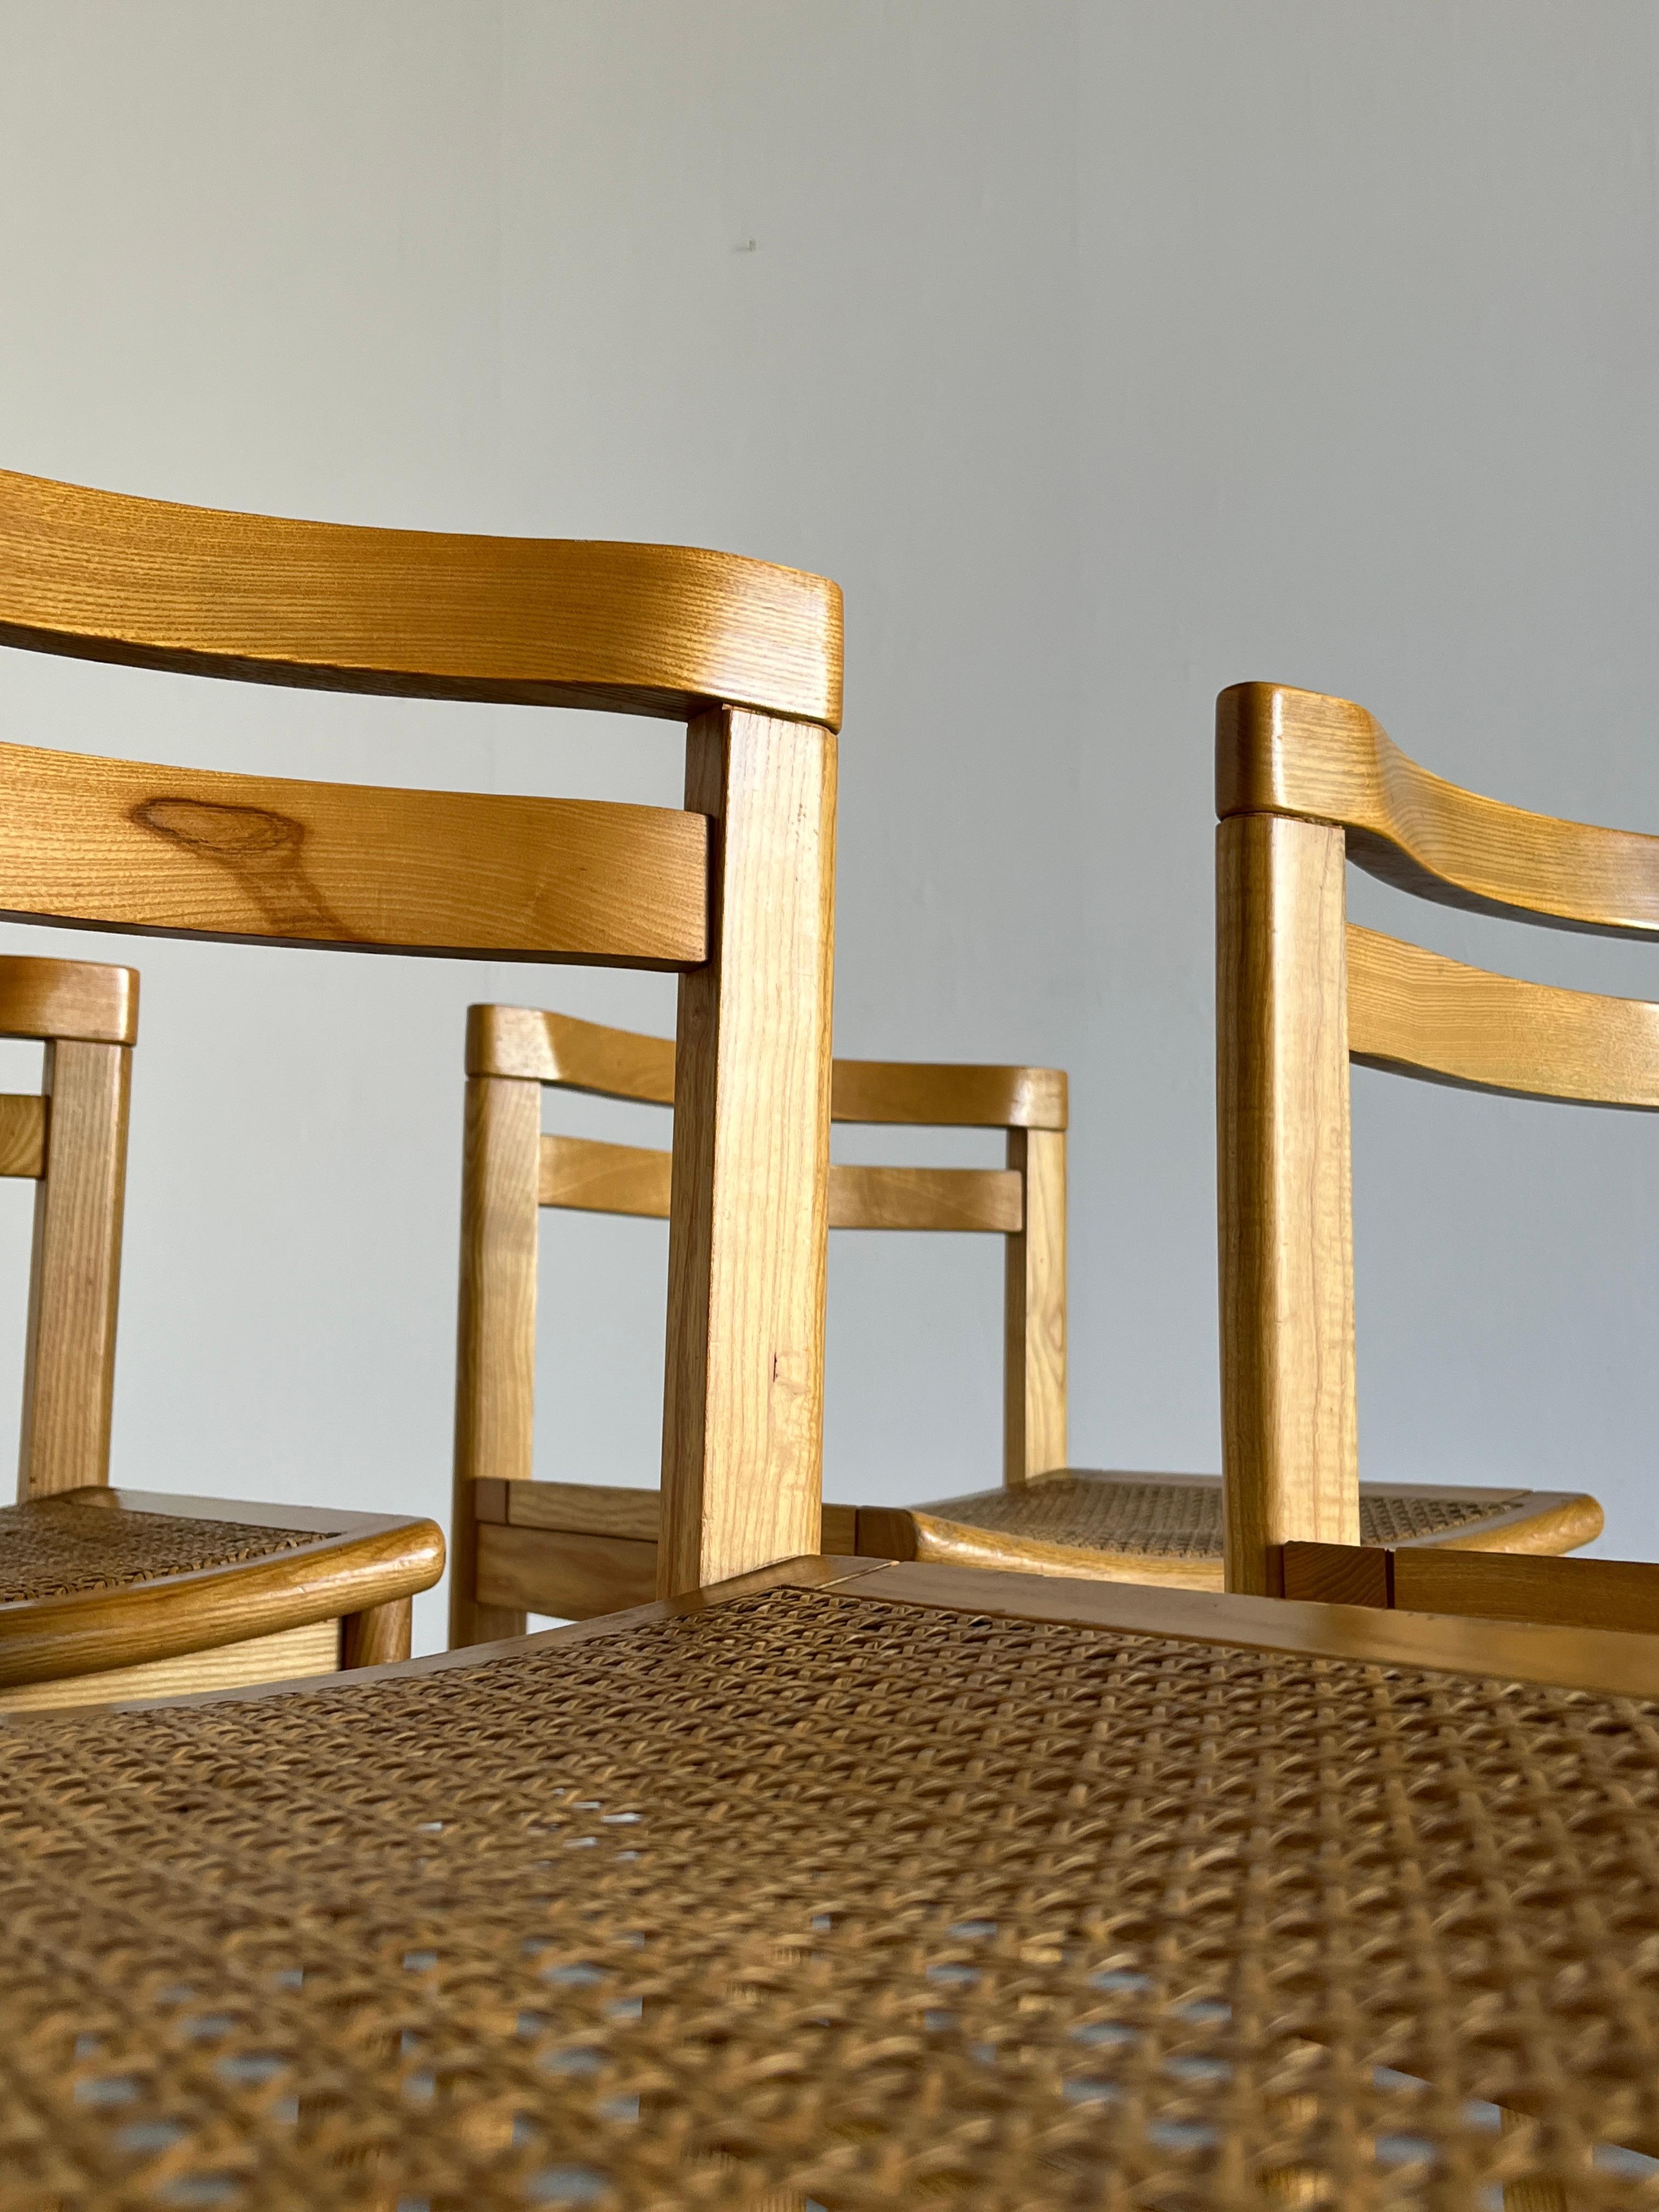 Set of 4 Mid-Century Modern Constructivist Wooden Dining Chairs in Beech, 1960s For Sale 4